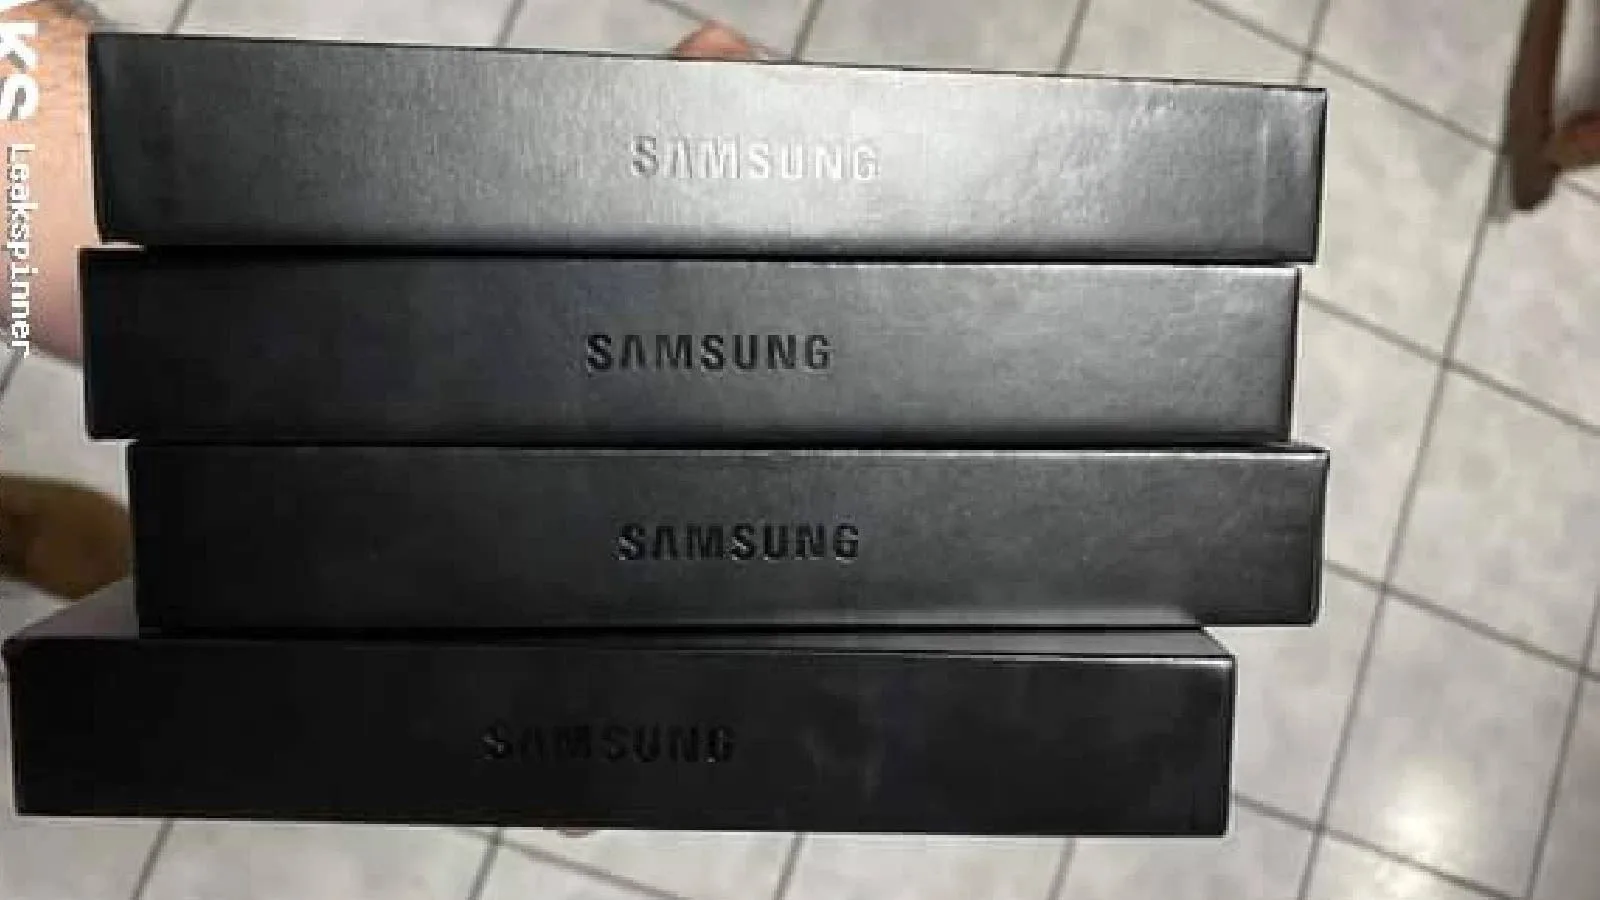 Galaxy S23 Ultra and S23 show up jpg